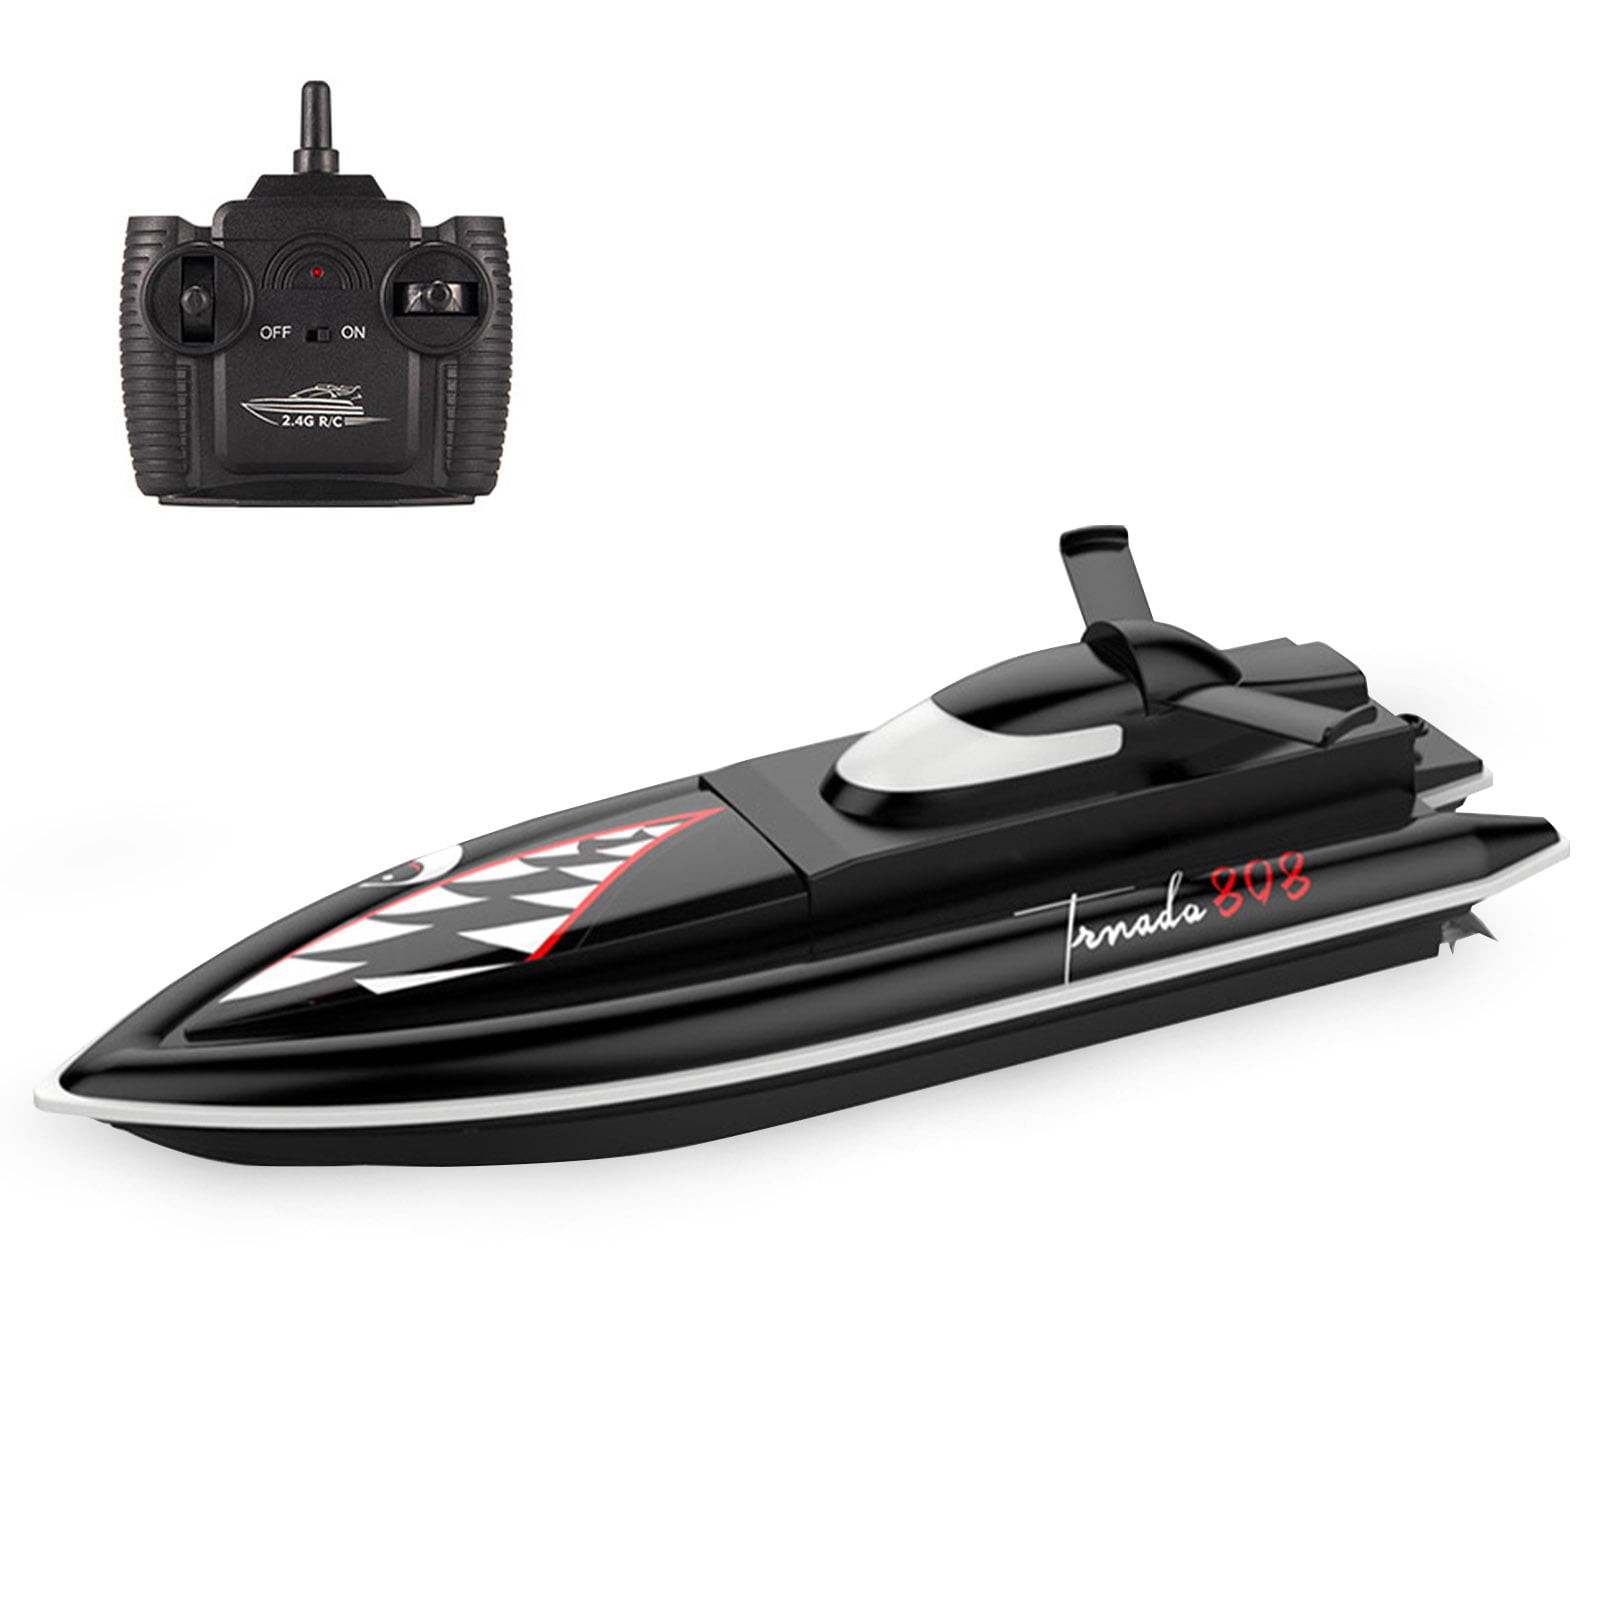 GoolRC RC Boat Remote Control Boat High Speed RC Boat 25Km/h 2.4GHz